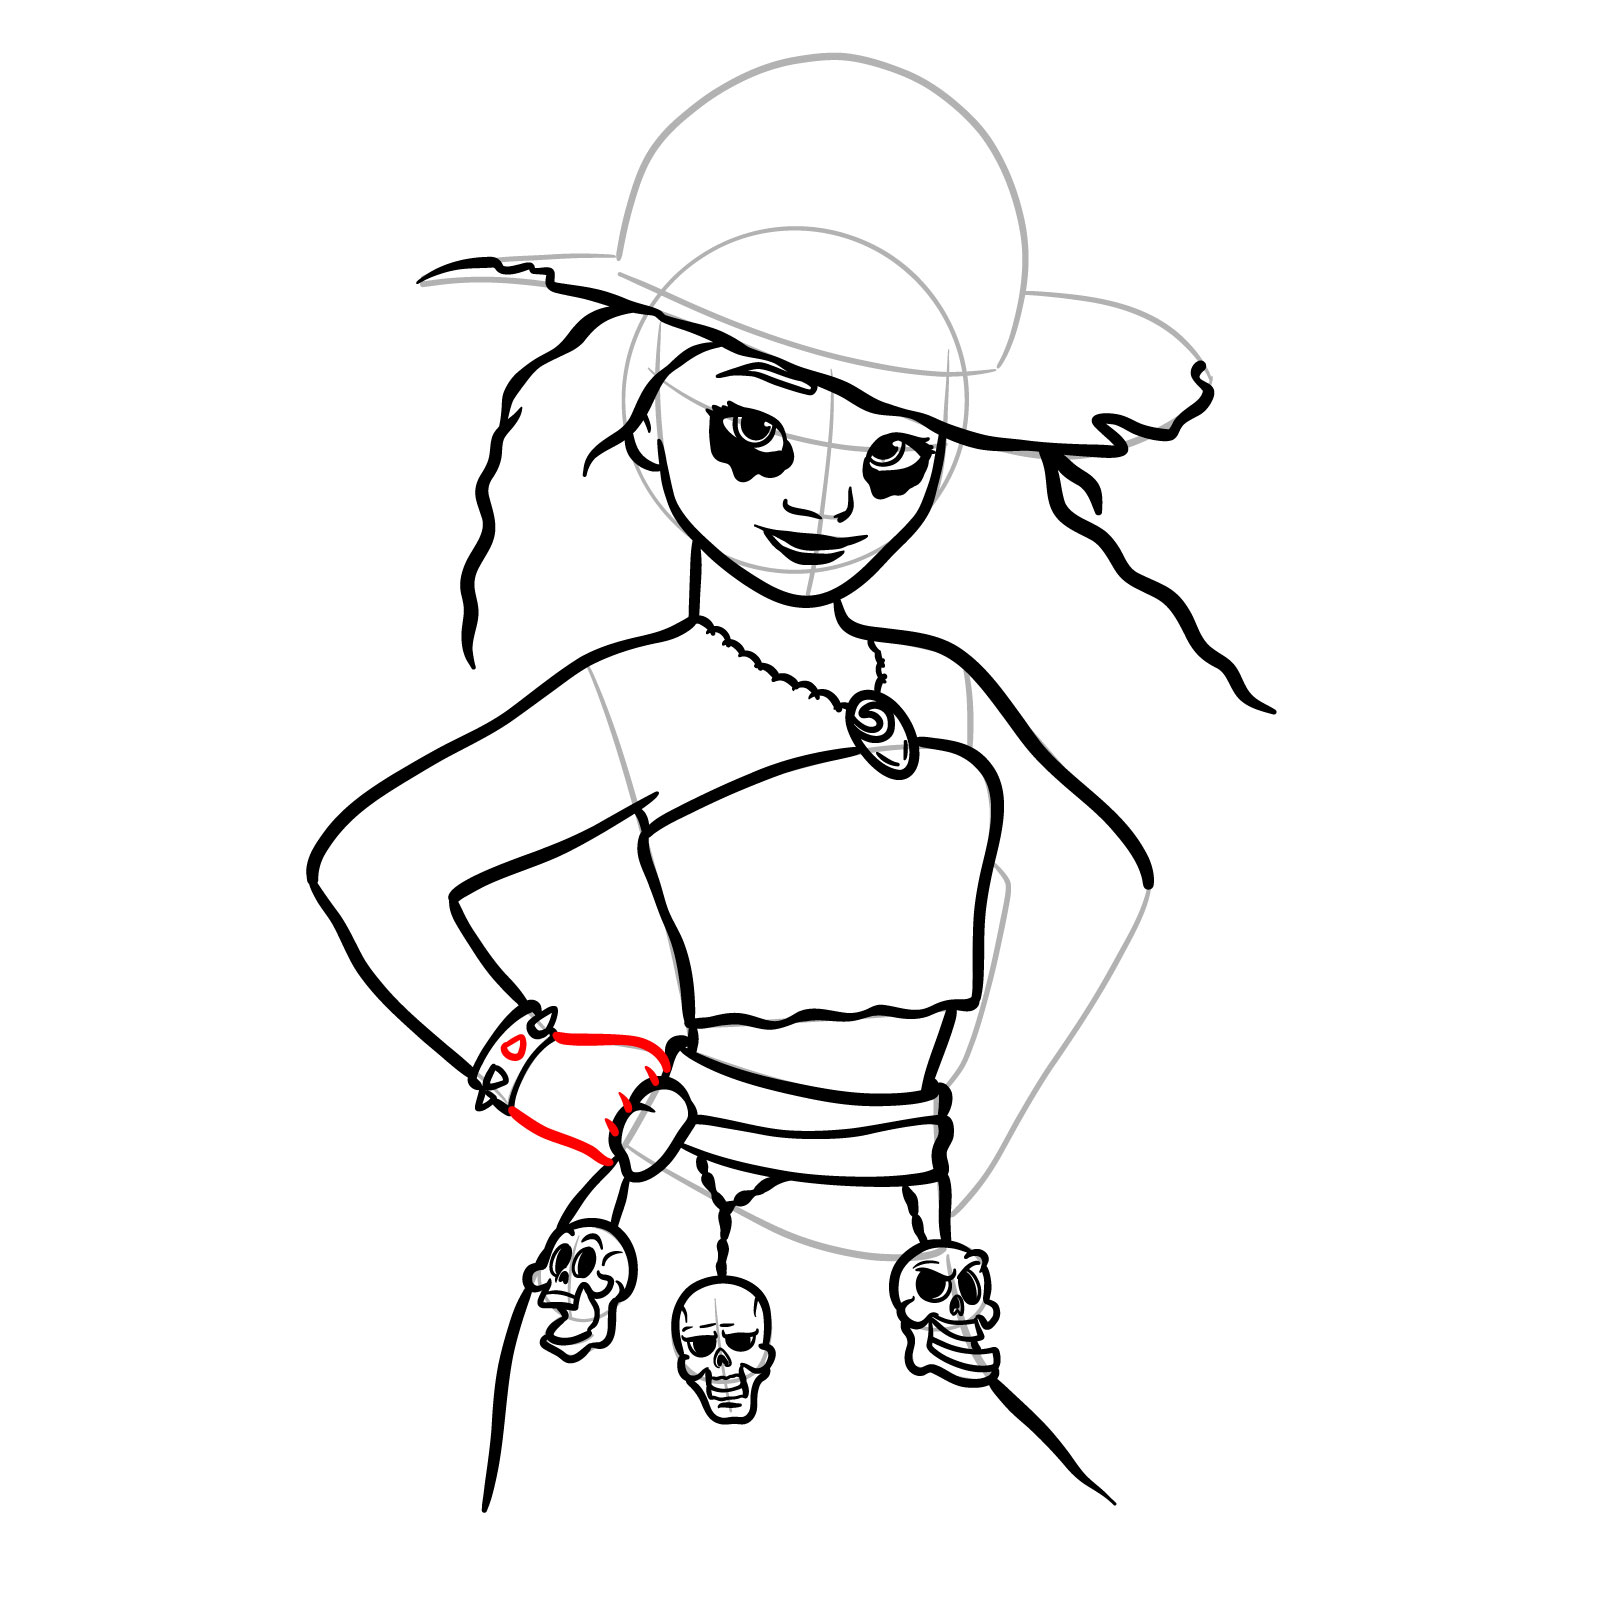 How to Draw Halloween Moana as a Staw Hat Pirate - step 30